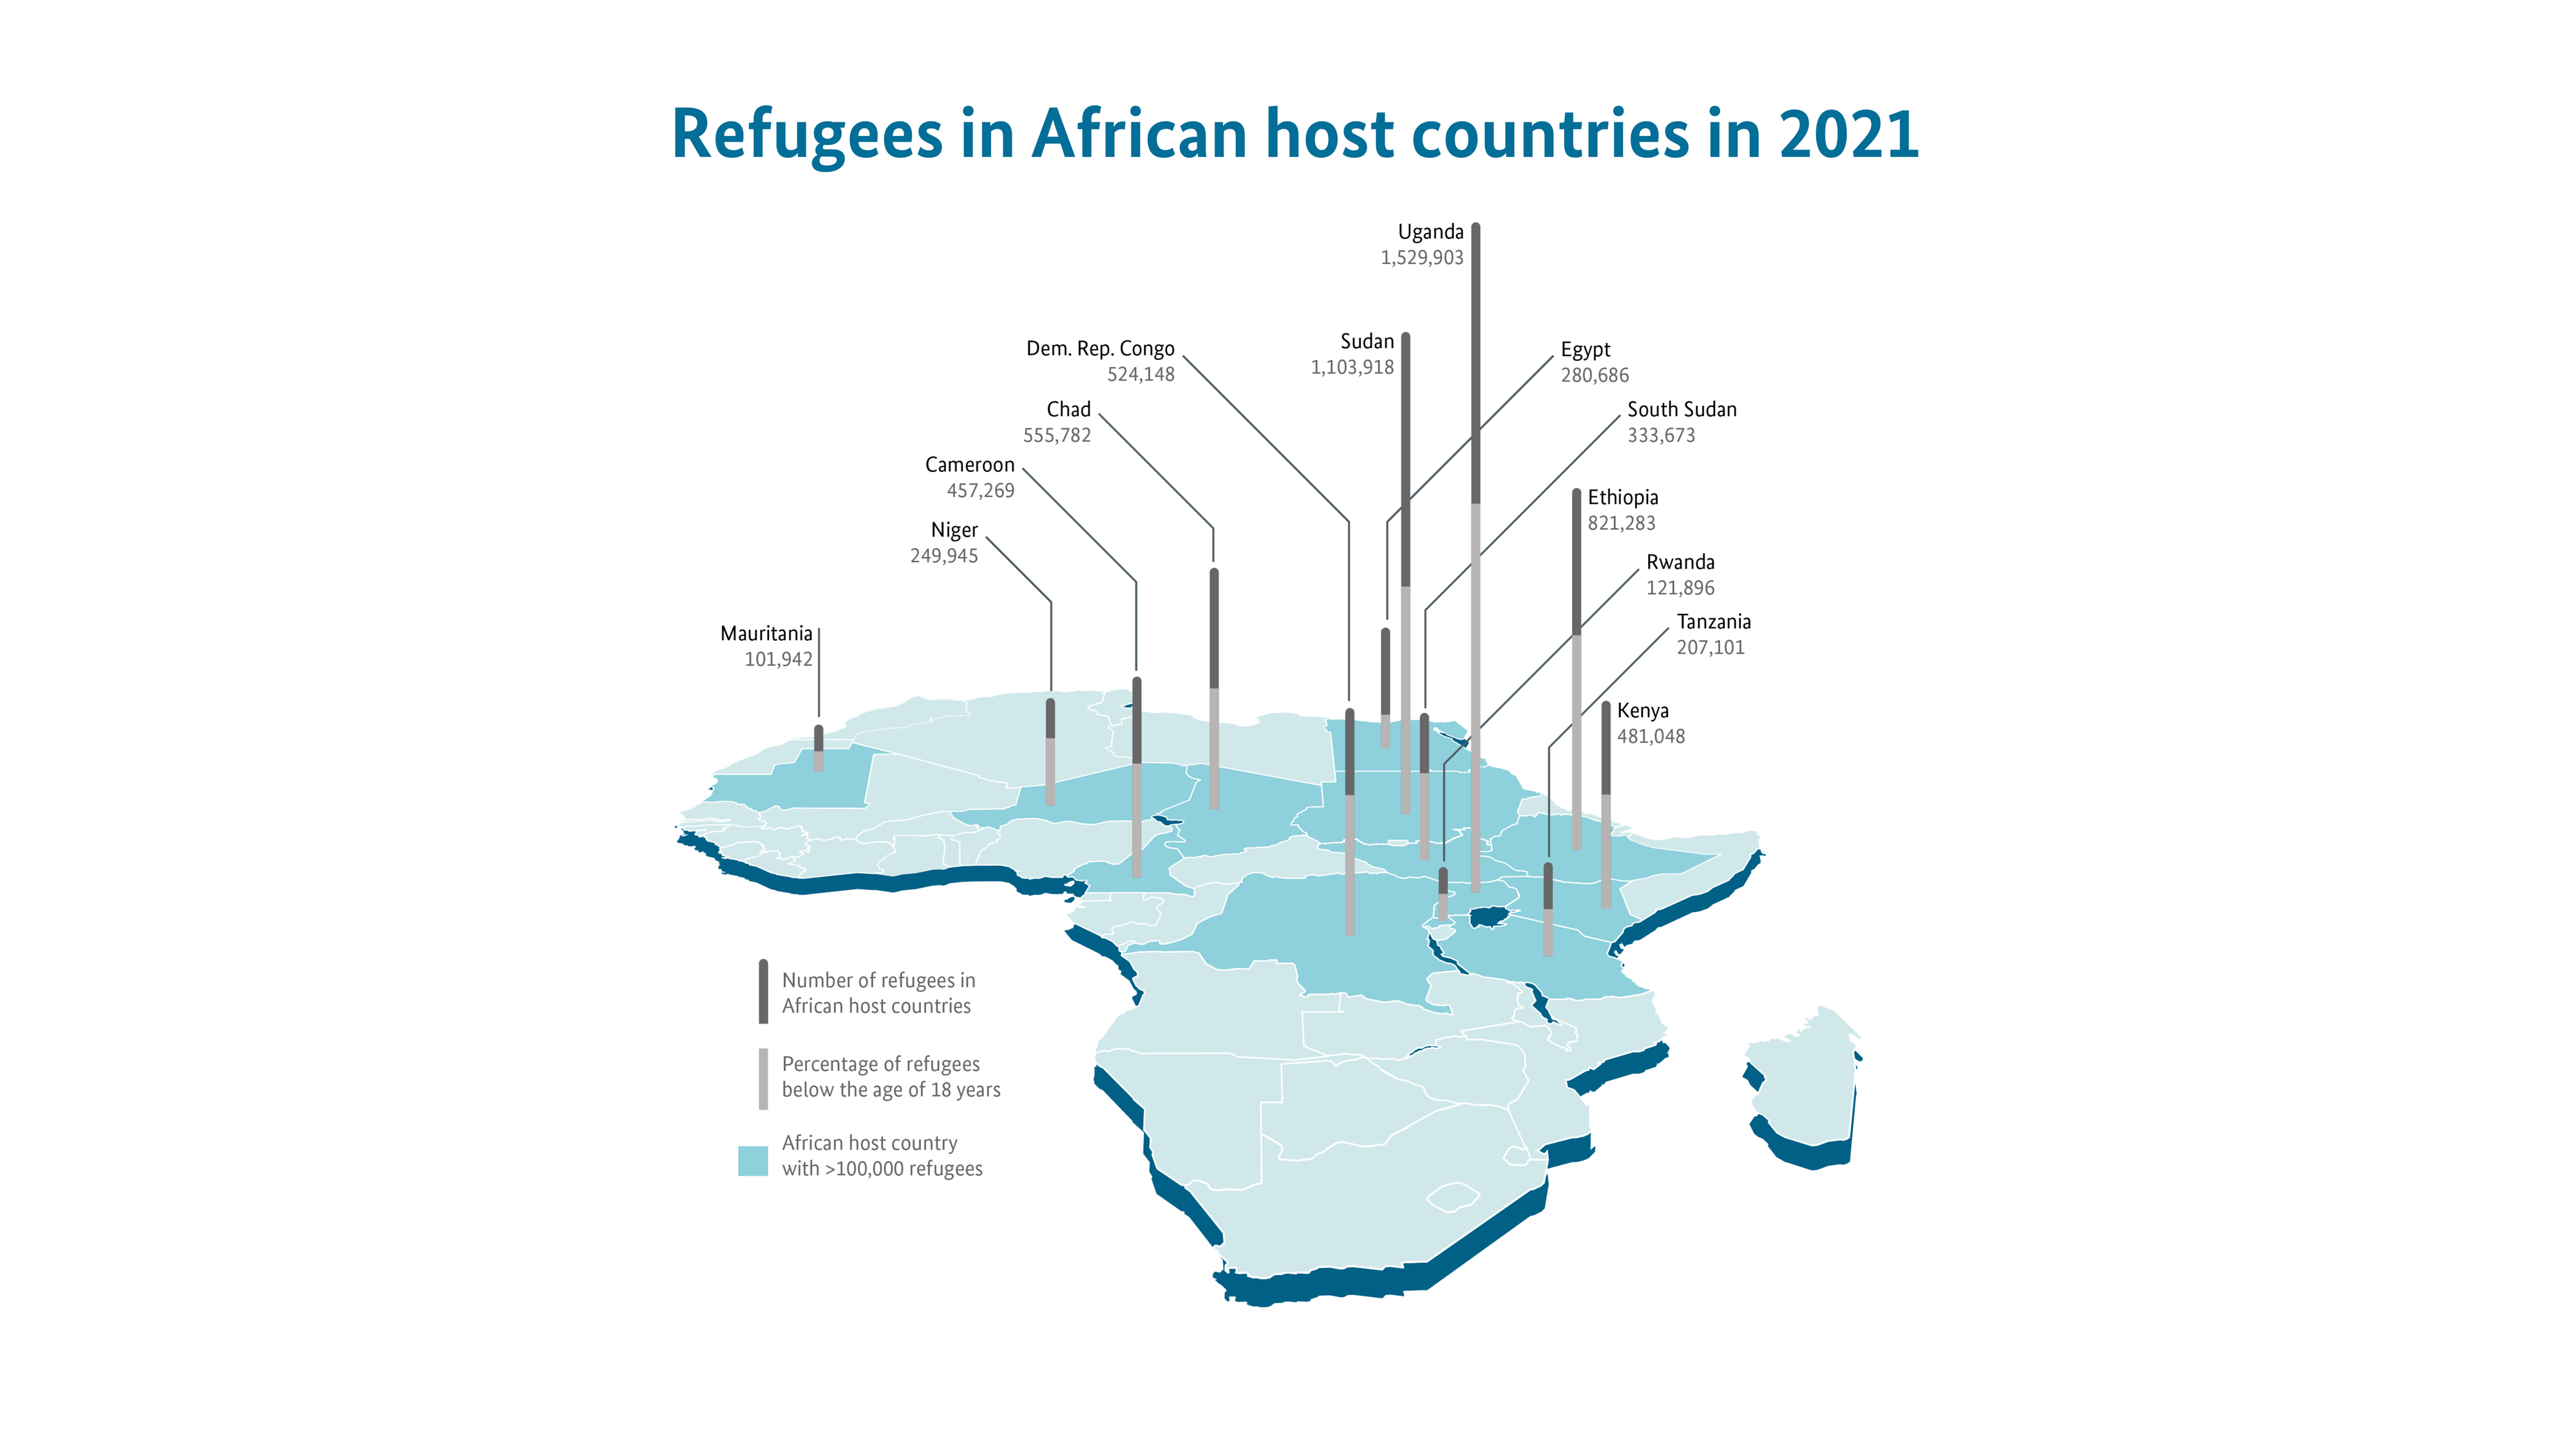 Cross-border refugees in African host countries 2021